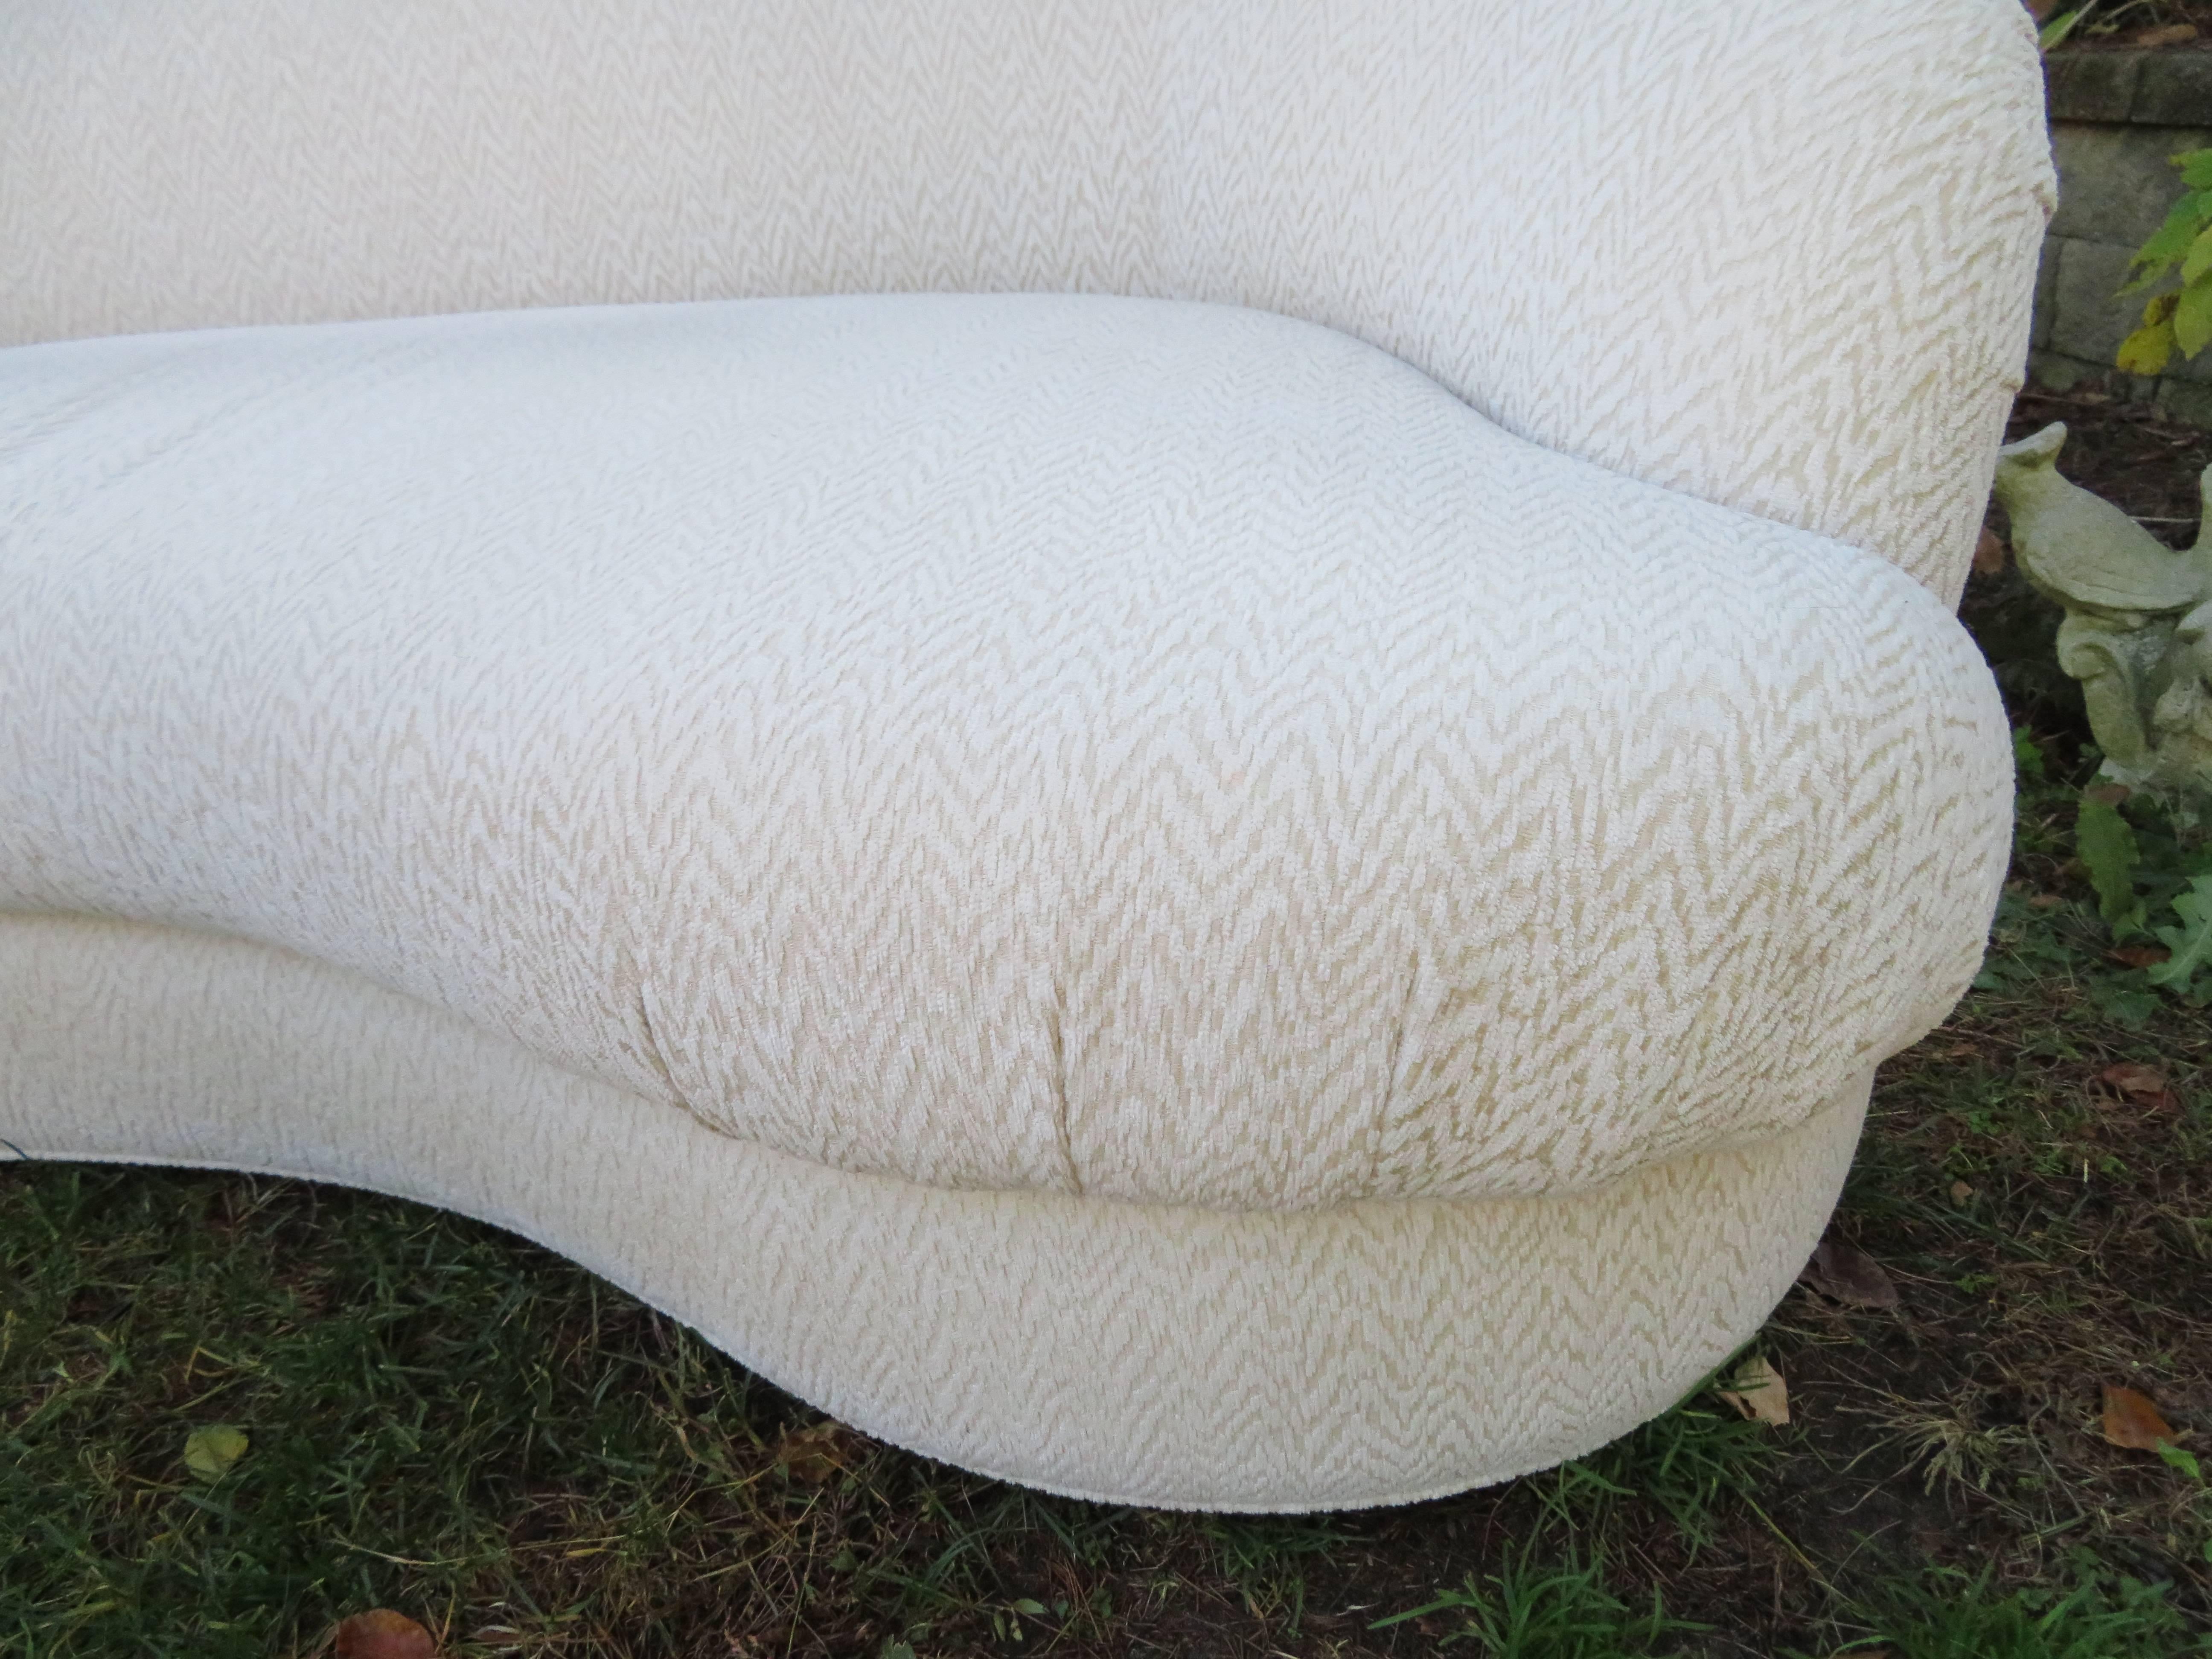 American Excellent Pair of Kidney Shaped Sofas Mid-Century Modern For Sale